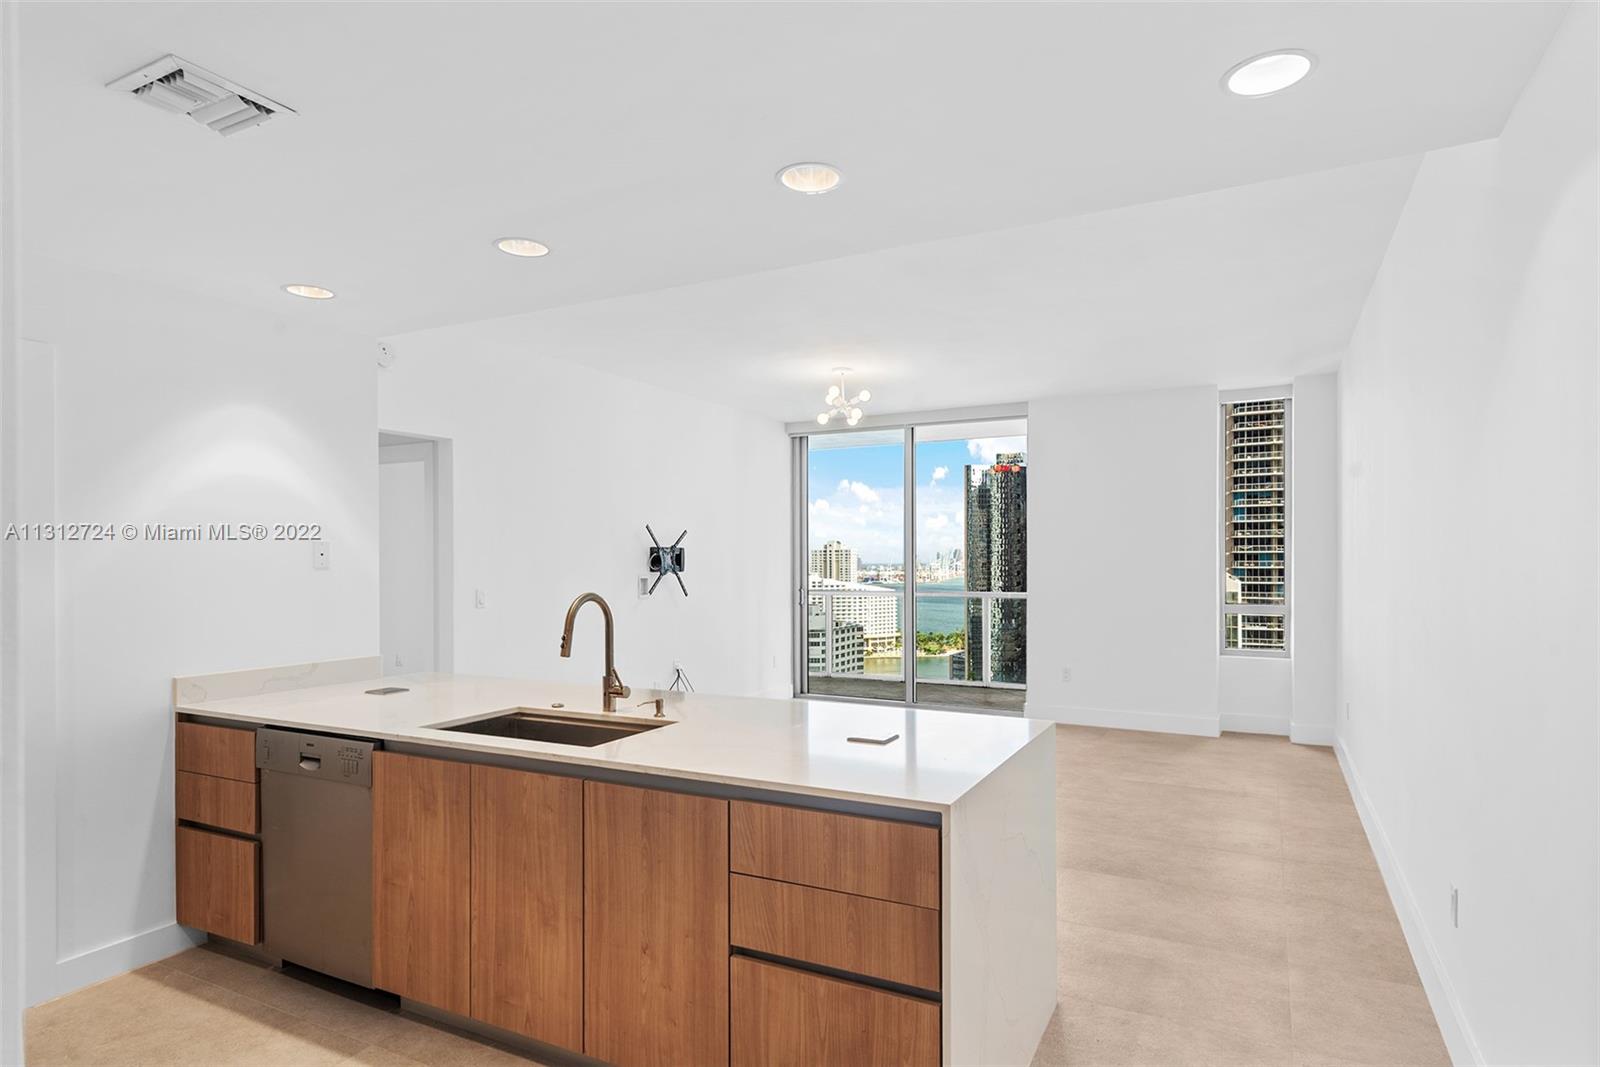 Fully renovated and rarely available corner unit at 1060 Brickell Condominium. Residents of this unit will enjoy spectacular bay and city views from the large wraparound balcony. Fully renovated in 2022 with porcelain flooring, new kitchen cabinetry, extended quartz countertops, remodeled bathroom with terrazzo tile and glass enclosure, new doors, and custom closet. Great layout with large bedroom closet, enclosed laundry area, open kitchen, and lots of light. 1060 Brickell is a well-managed community with amenities including fitness center, sauna, pool, hot tub, wine and cigar room, business center, virtual golf and billiards. In the heart of Brickell with easy access to Brickell City Centre, Mary Brickell Village, metro mover, dining, entertainment and supermarkets.